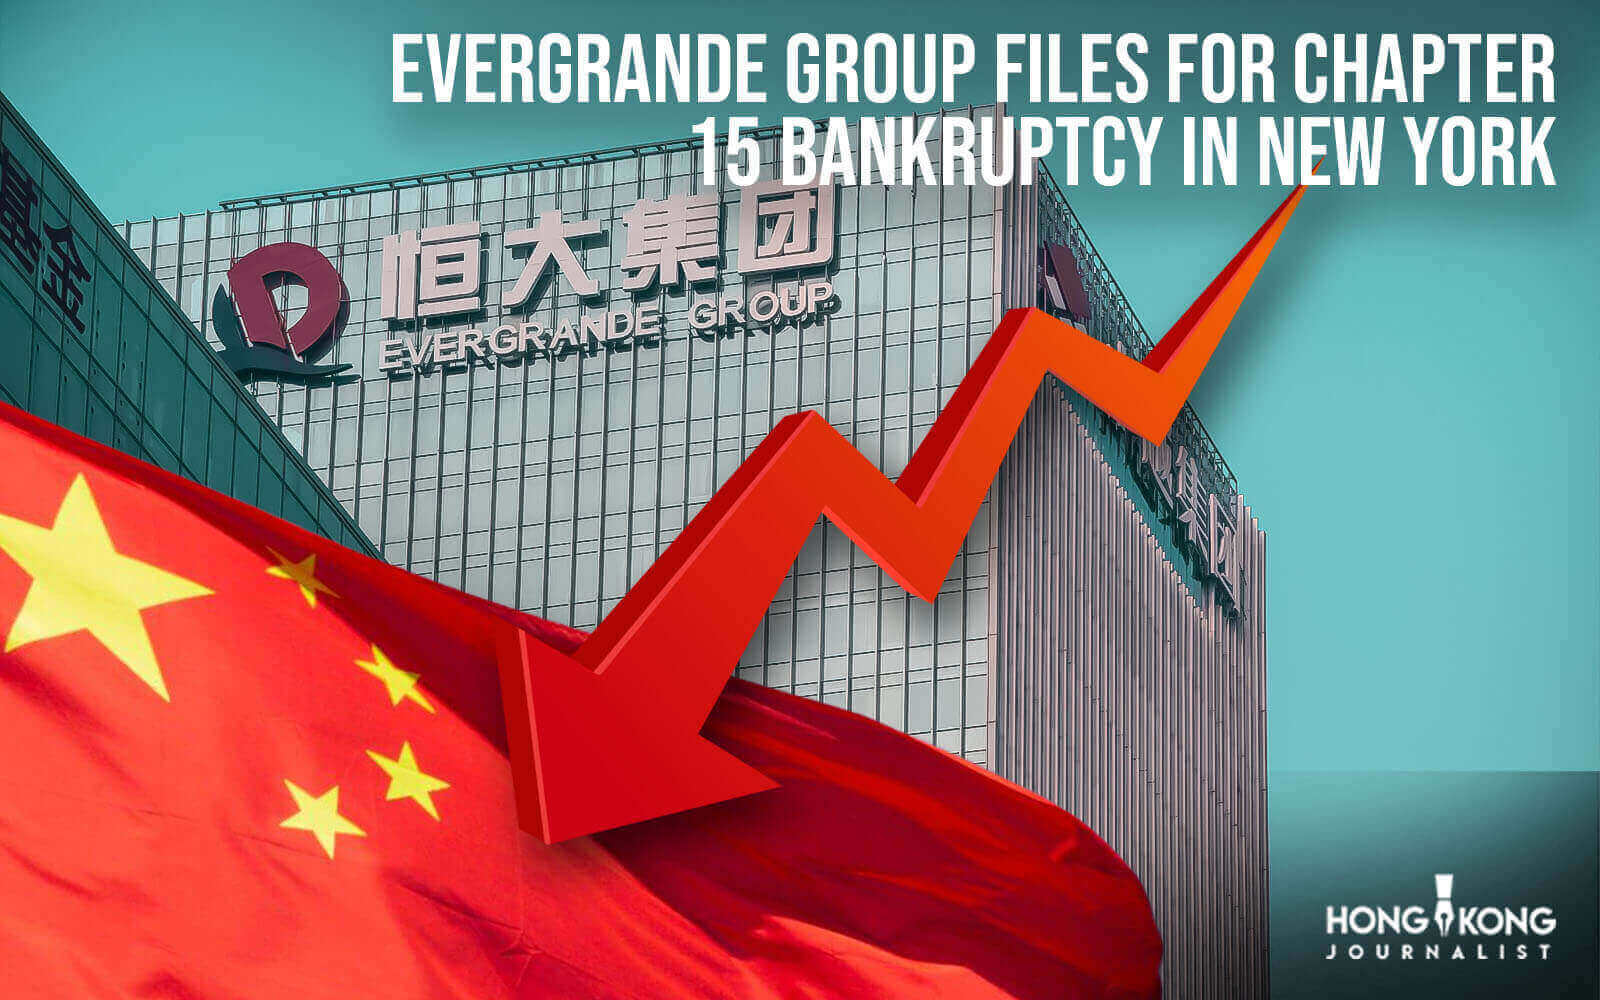 Evergrande Group files for Chapter 15 bankruptcy in New York